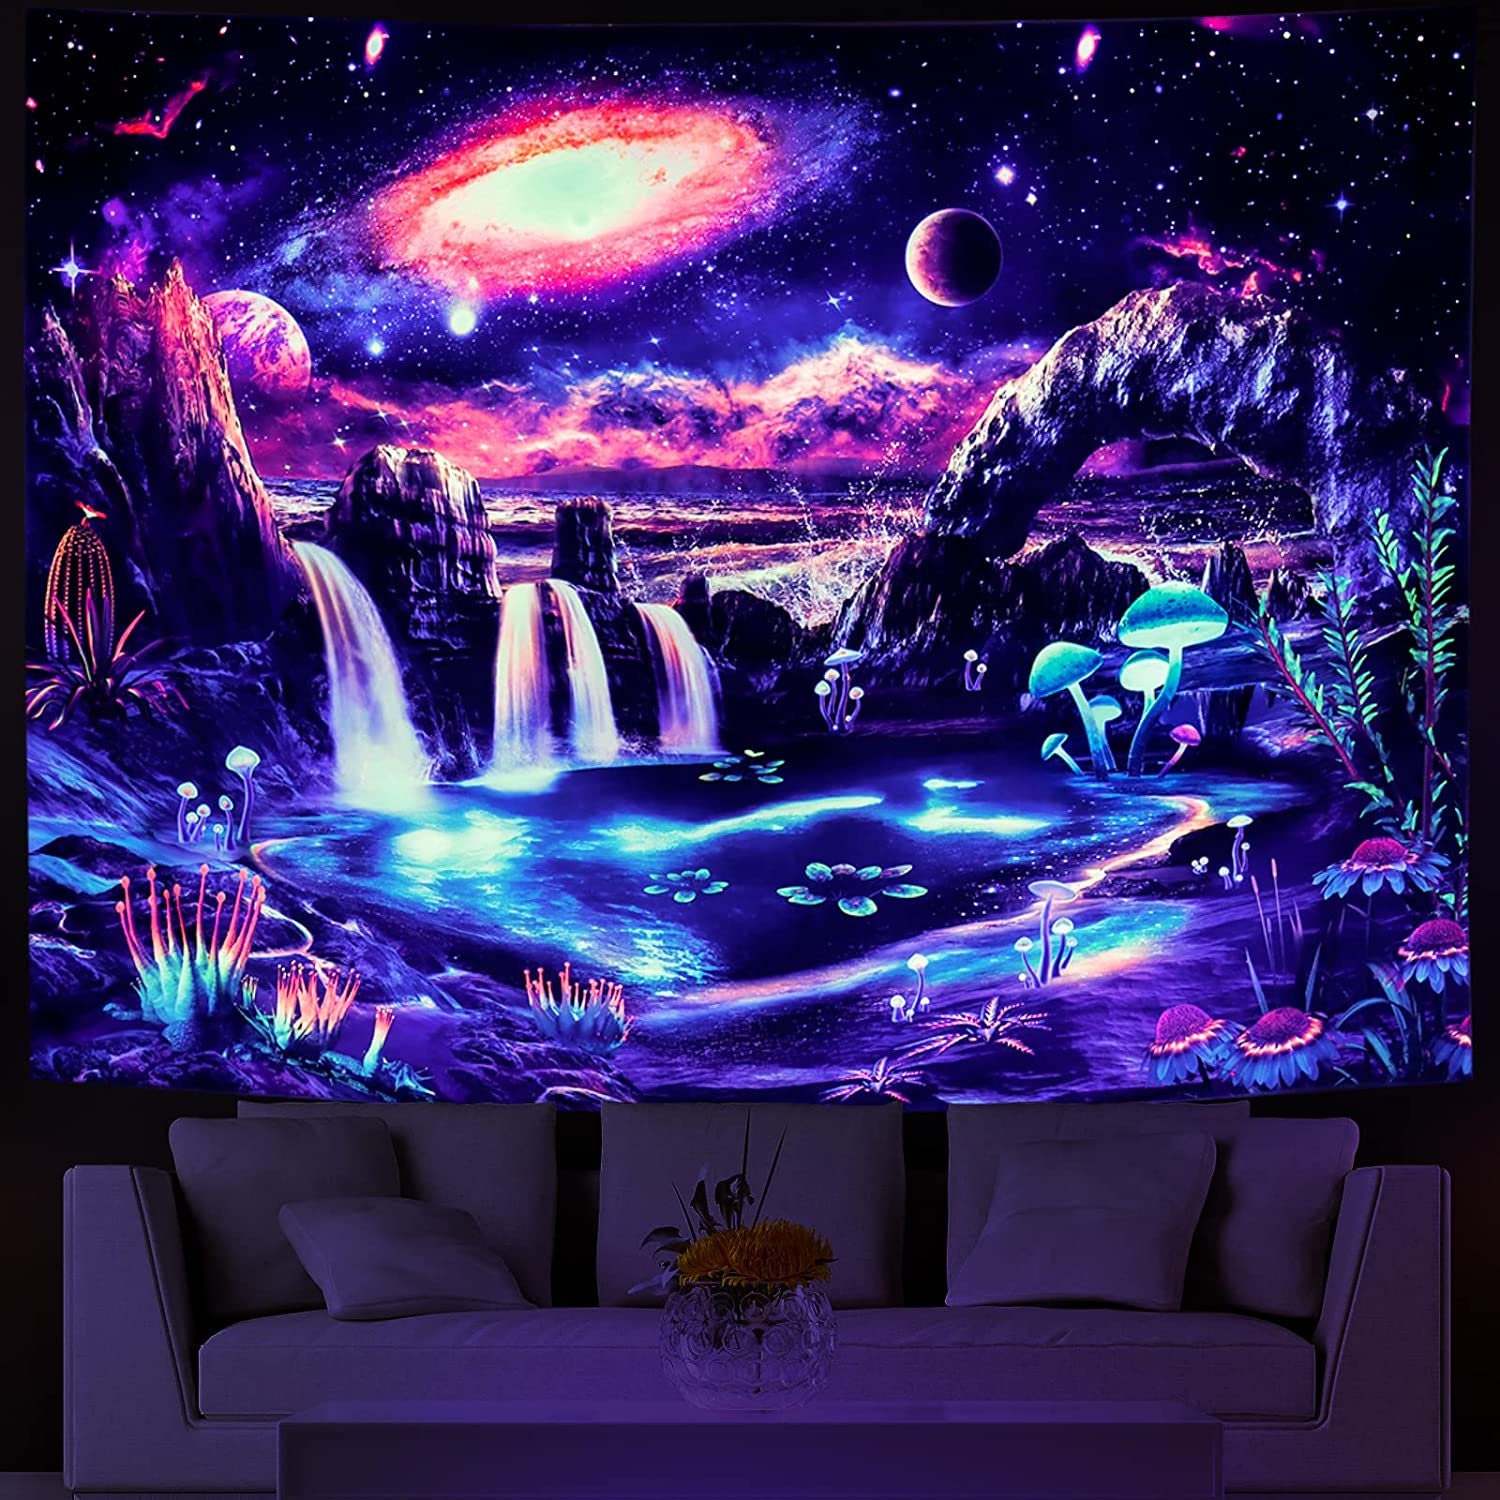 Astronaut Tapestry, Galaxy Tapestry Space Tapestry Funny Tapestry for  Bedroom Decor ，L v ng Room Or Dorm Wall A Hang ng Tapestry (Aerol  te&Astronaut, 59 n*51 n) 